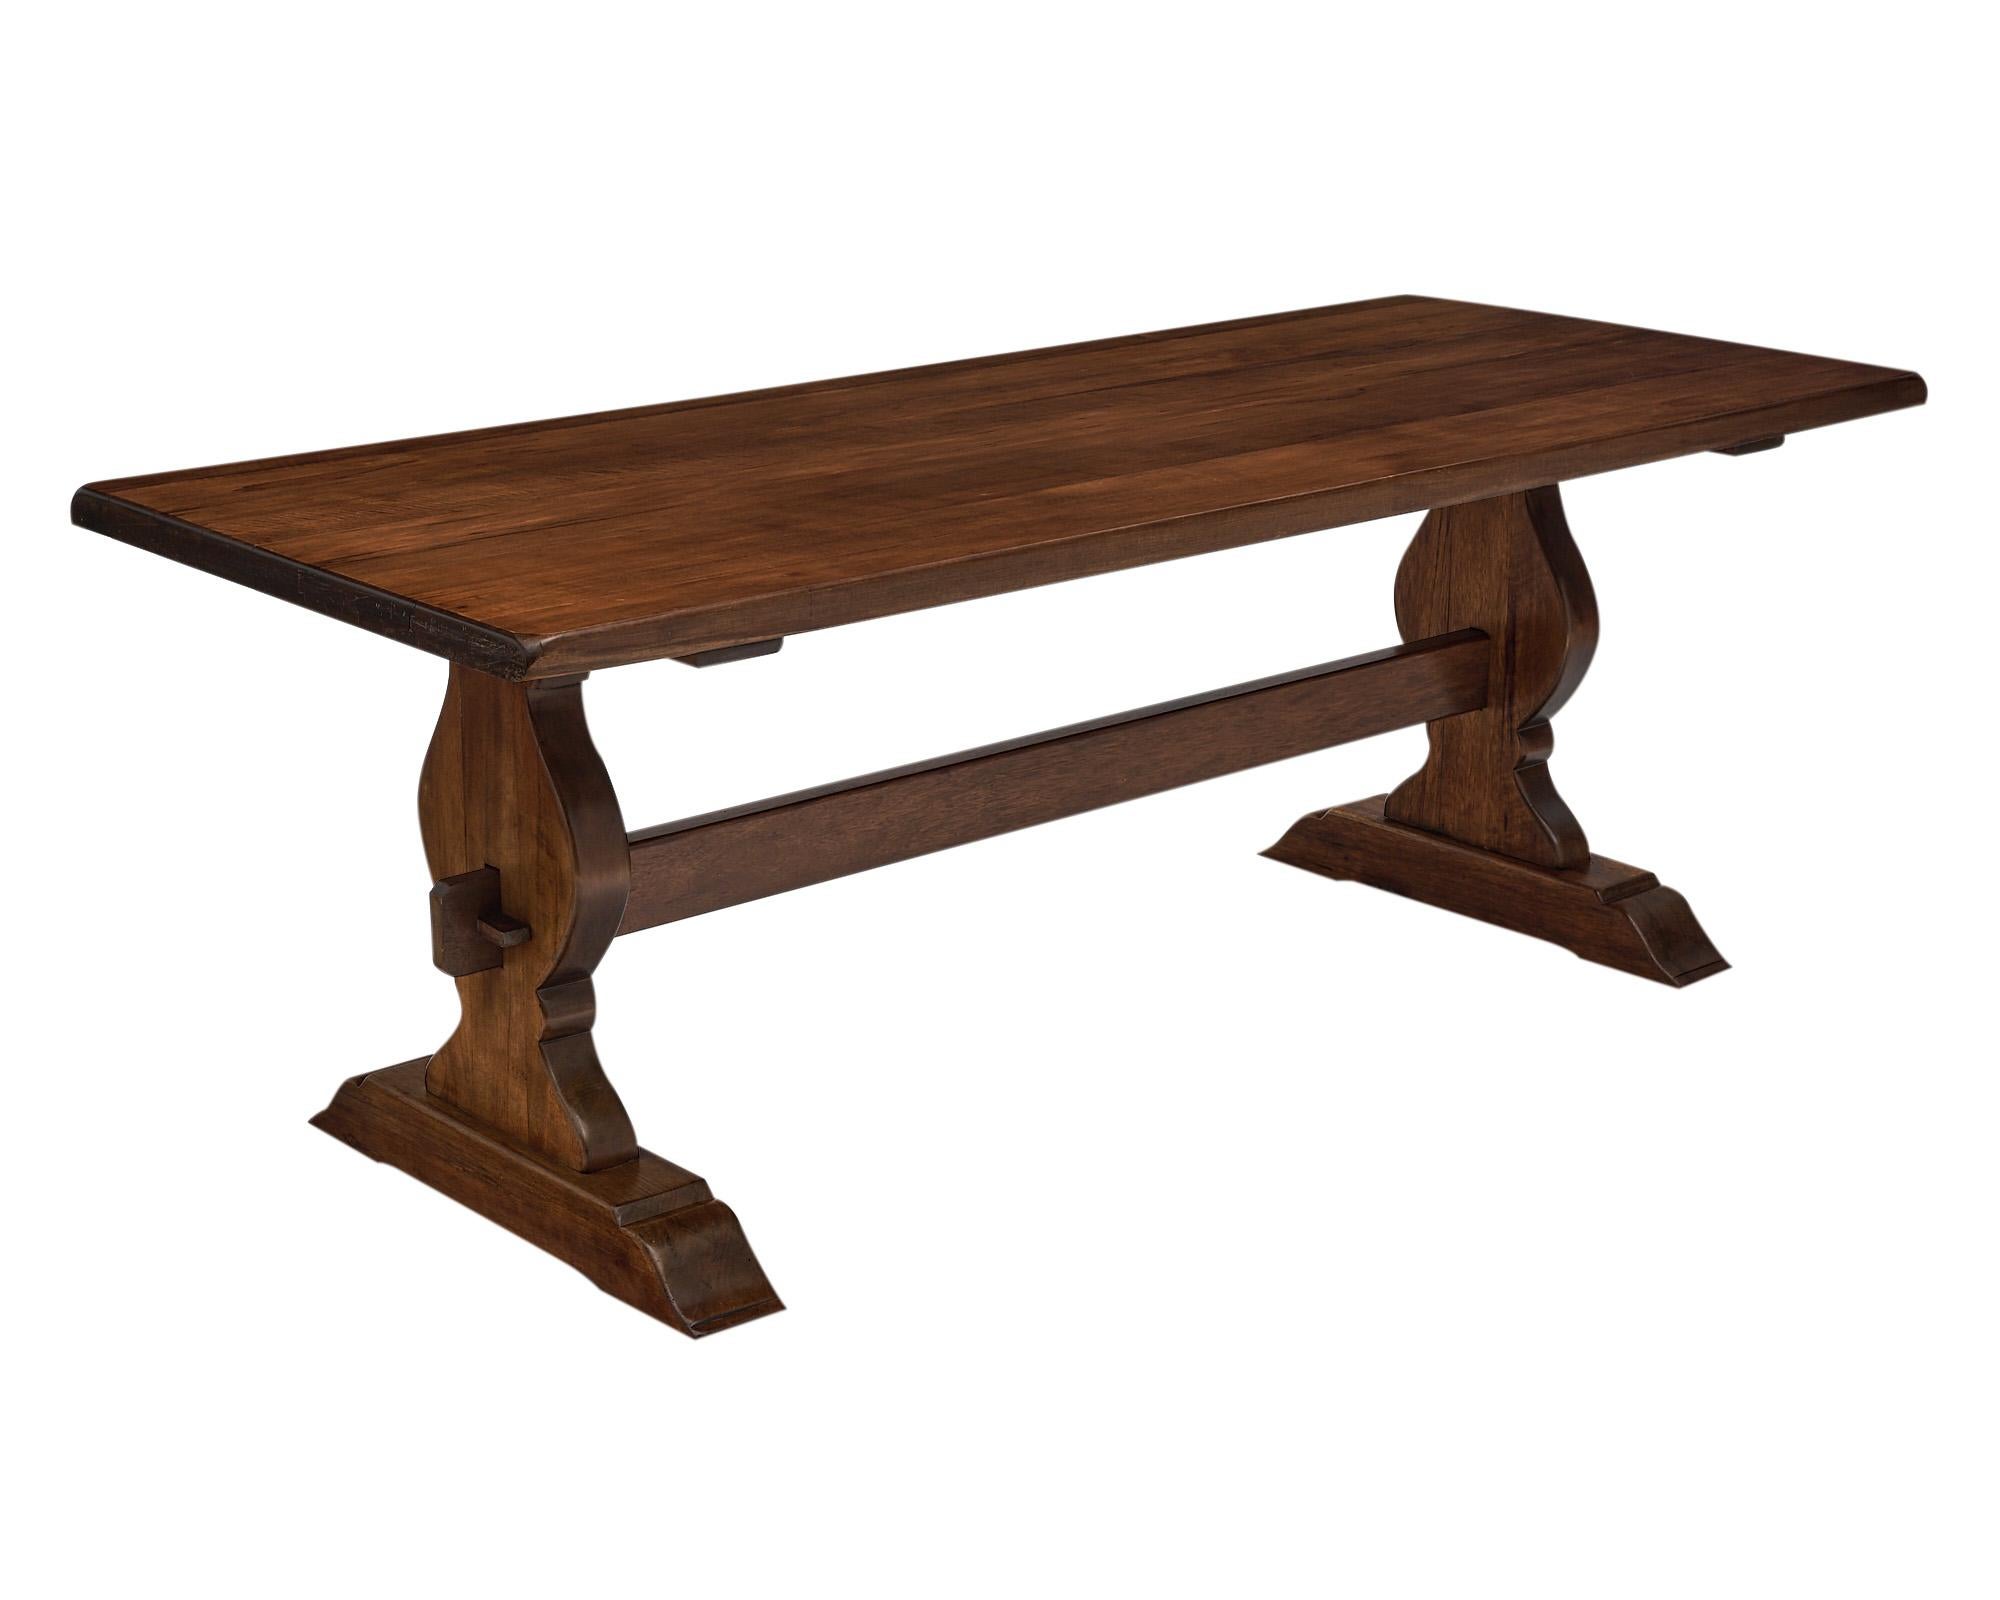 Renaissance Antique French Monastery Table with Benches